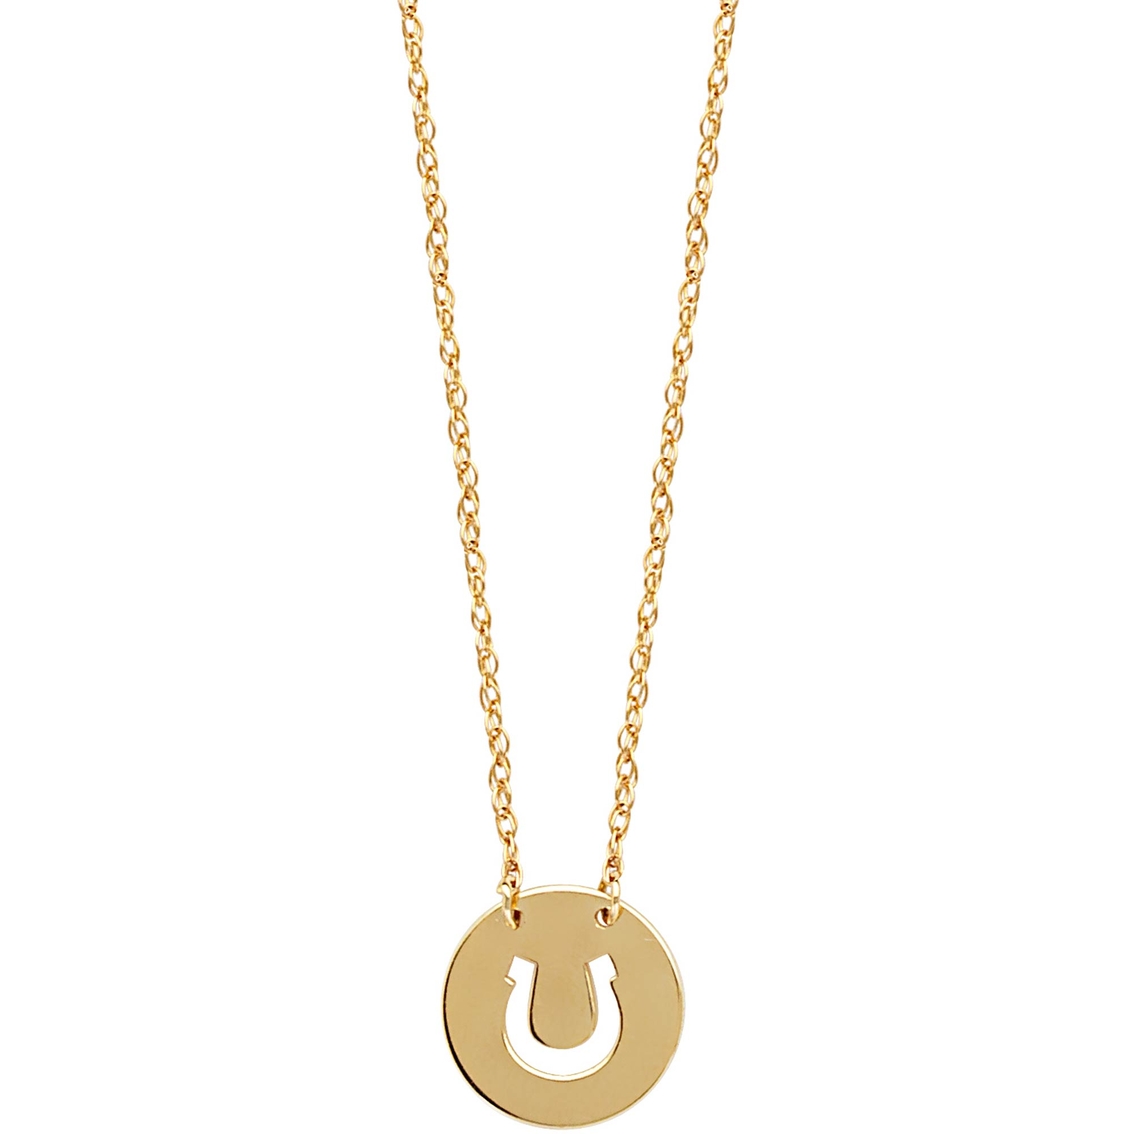 14K Yellow Gold 3-D Horseshoe with Horses Pendant on an Adjustable Chain Necklace 